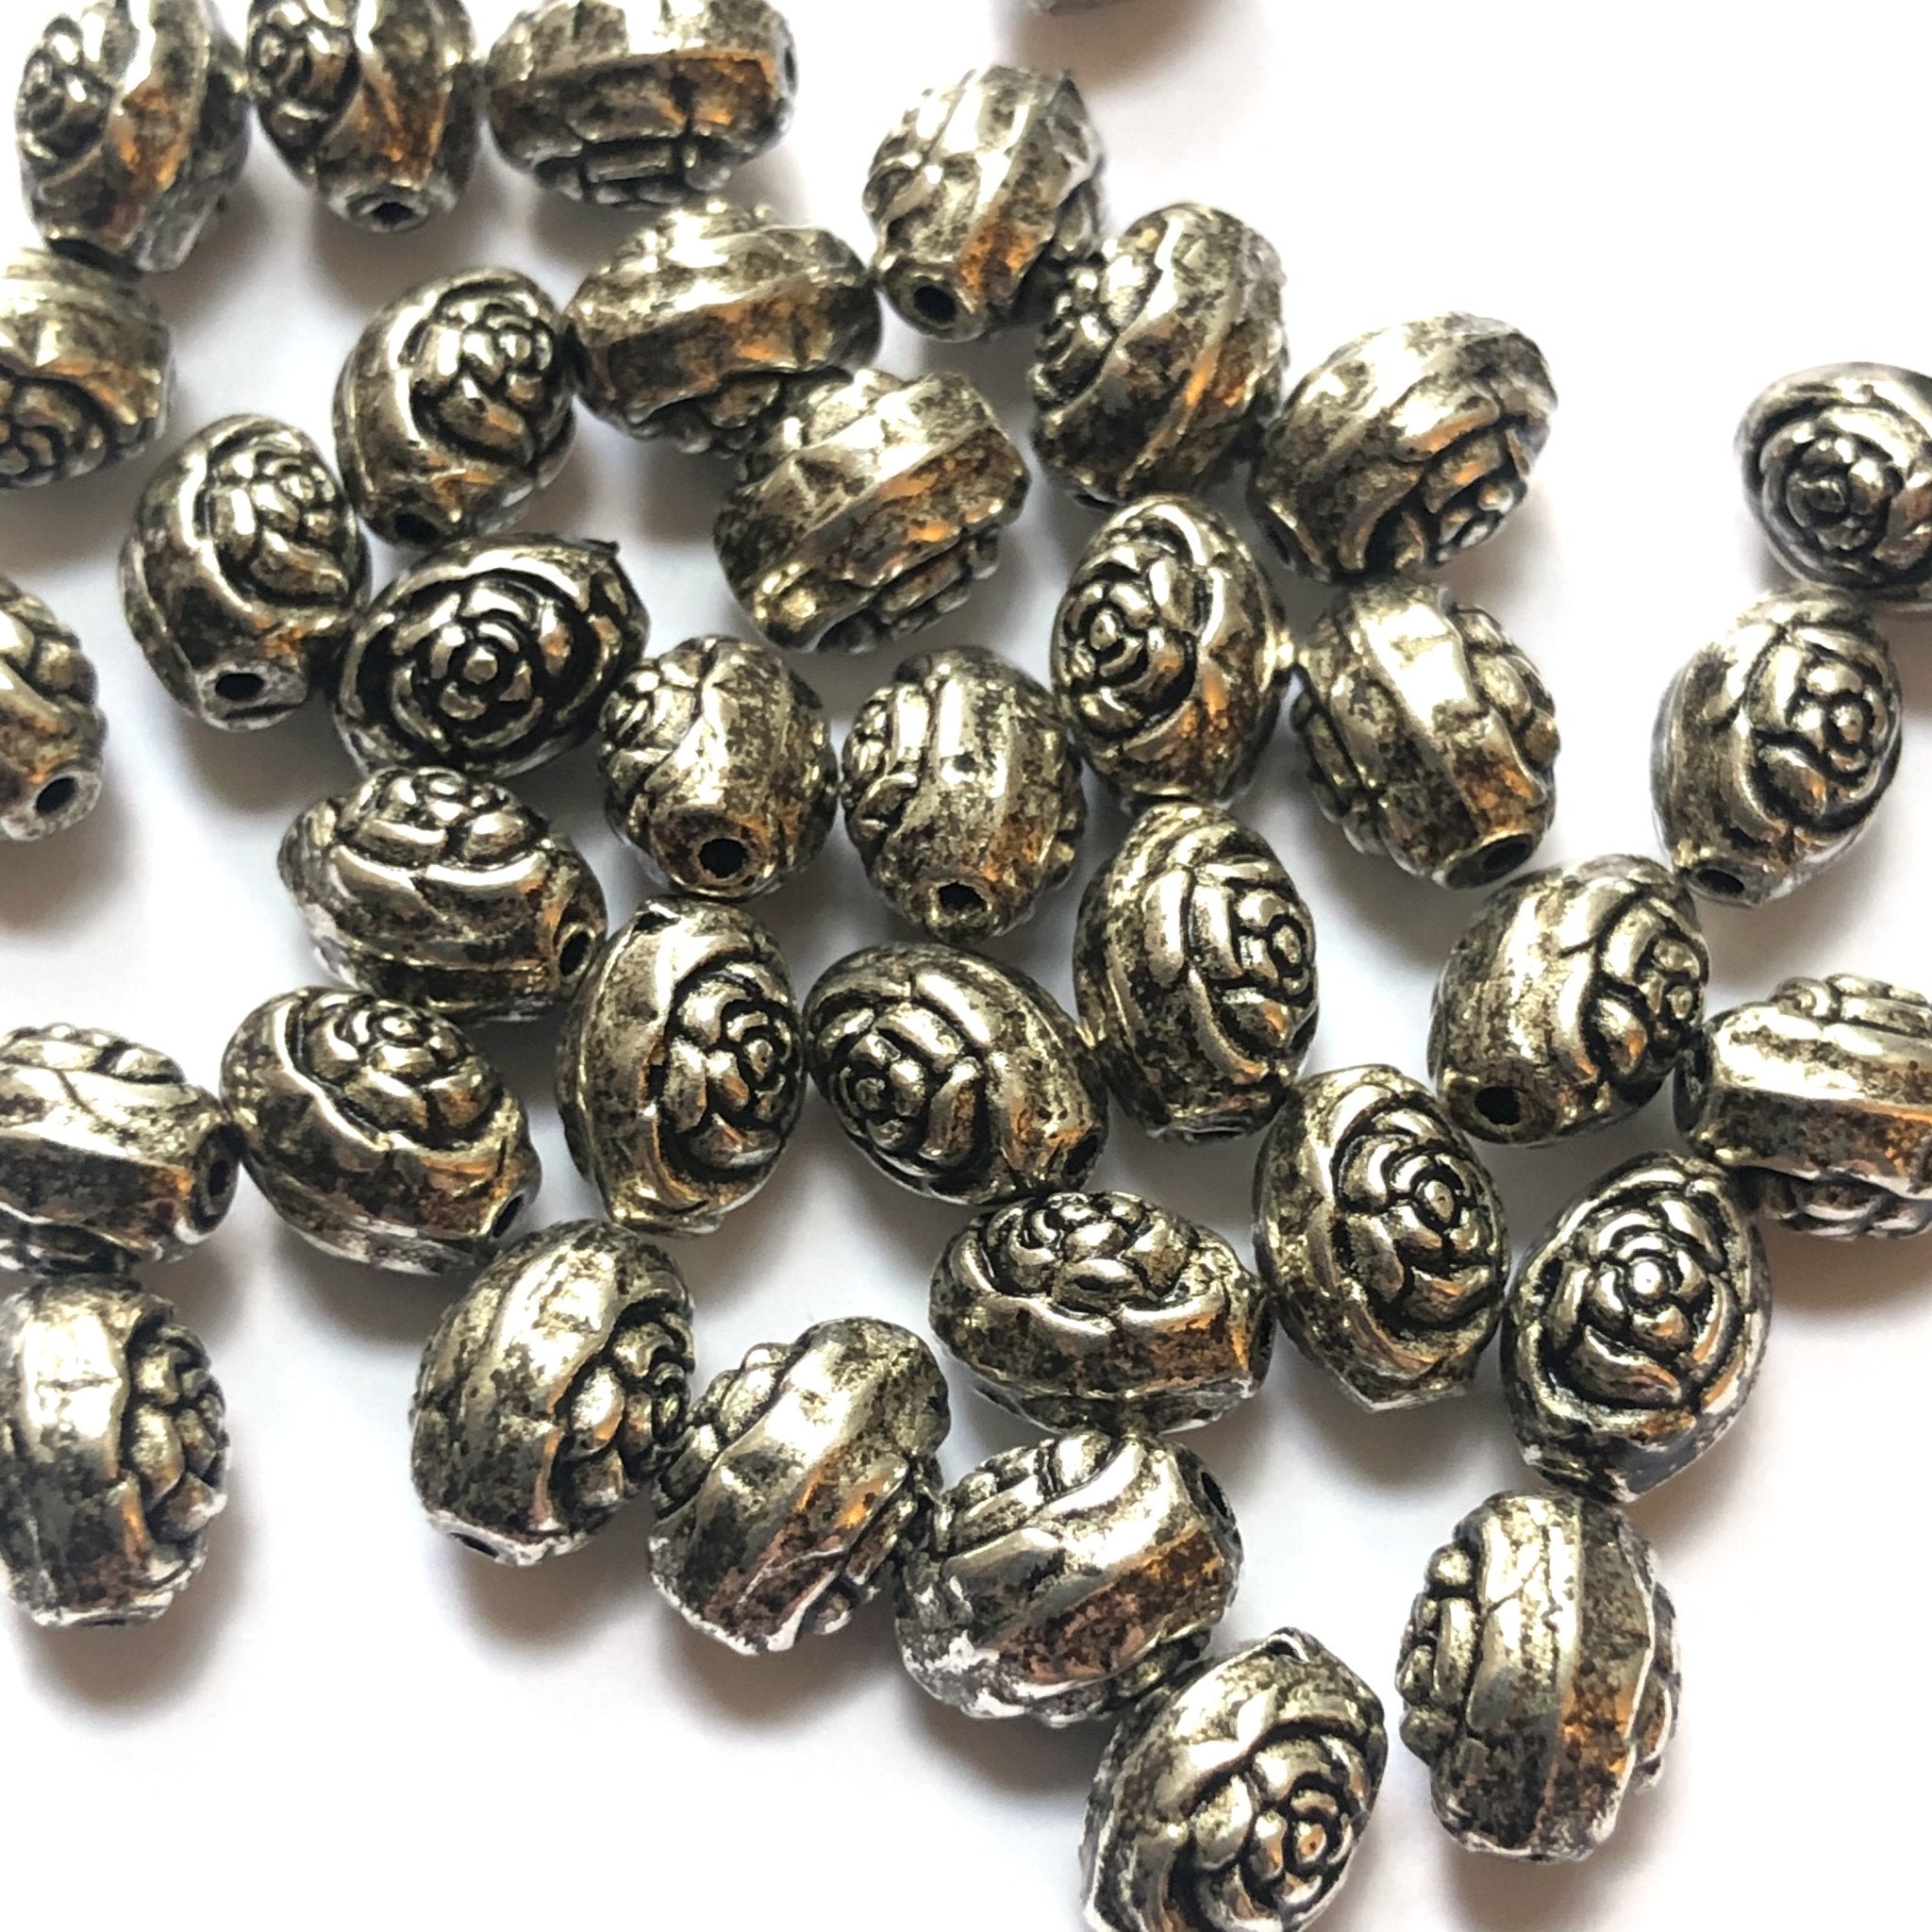 7X5MM Antique Silver Flower Oval Bead (144 pieces)